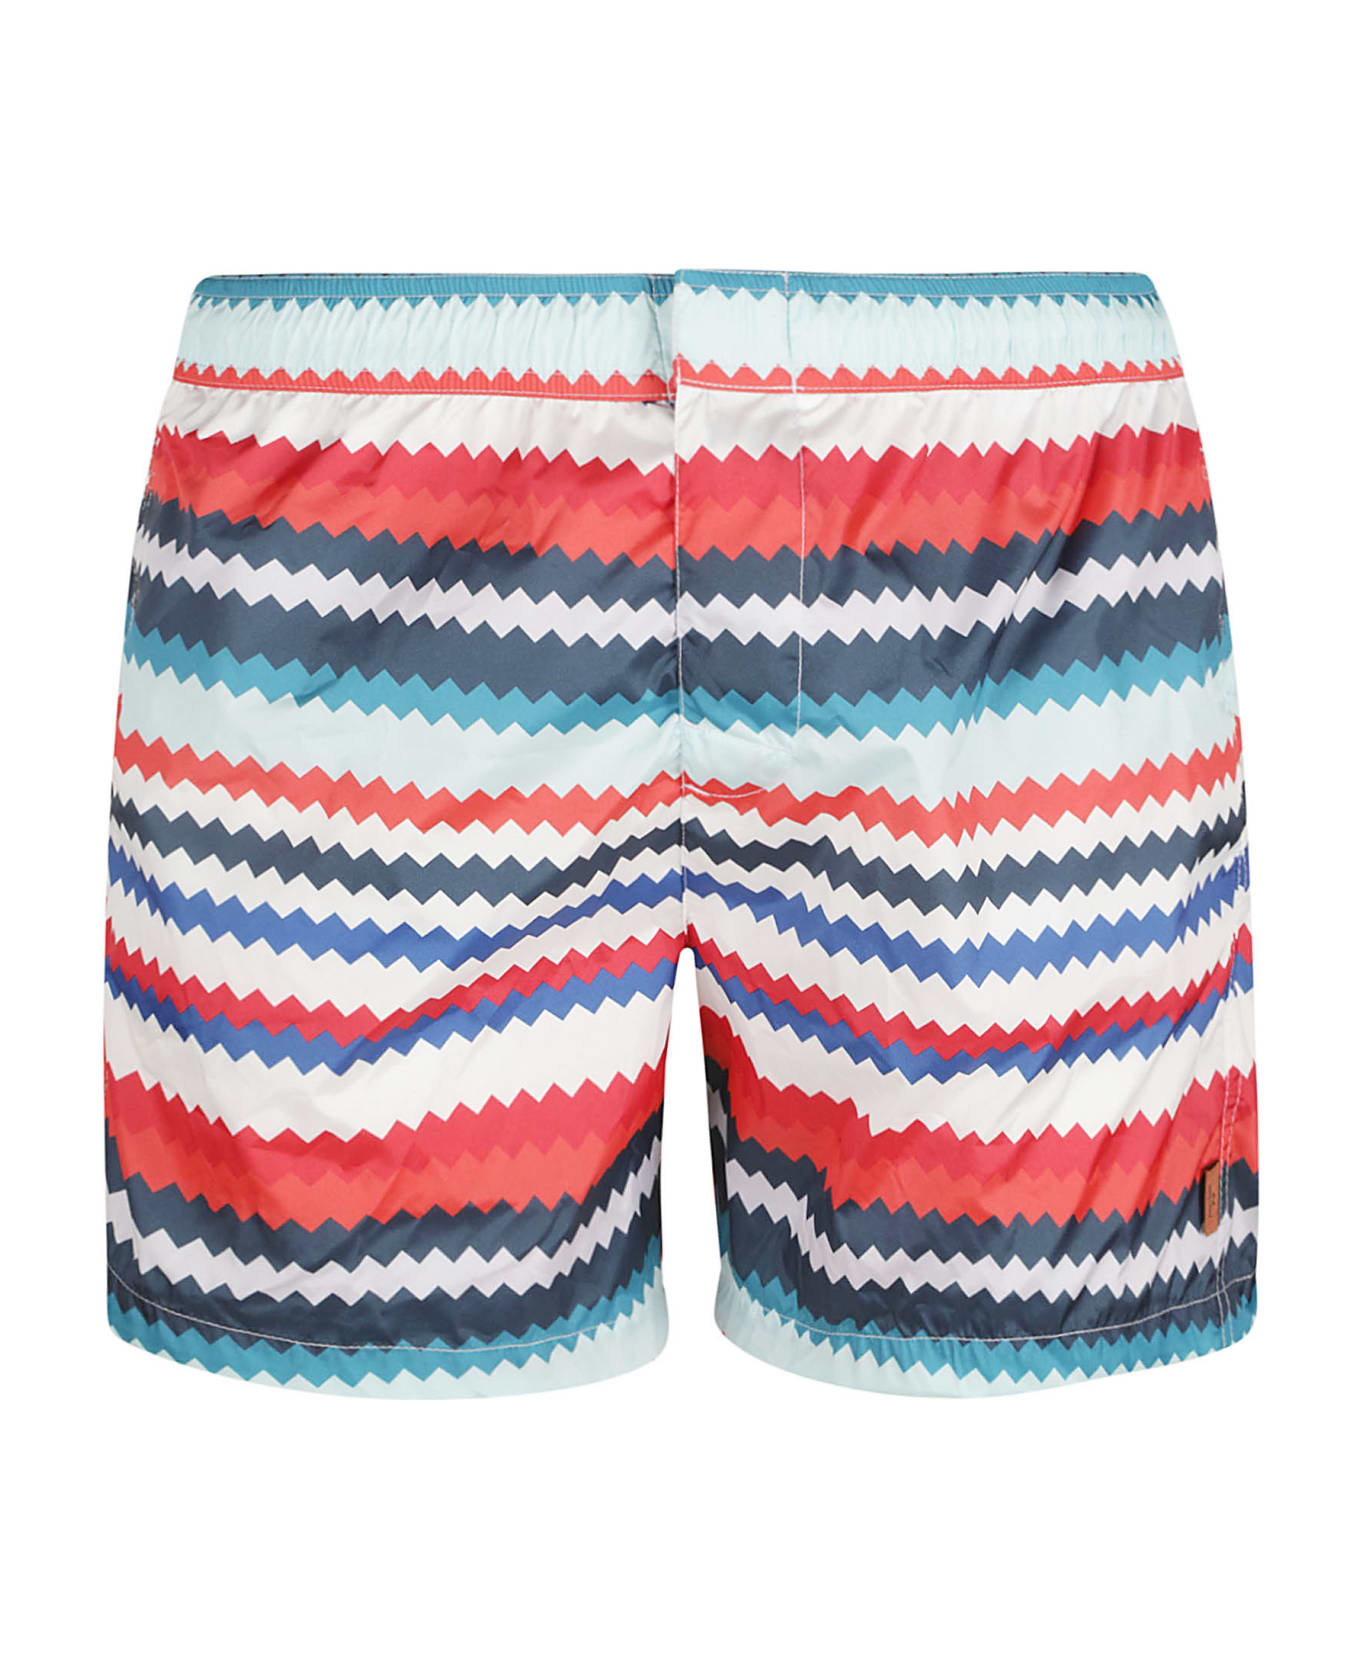 Missoni Printed Polyester Swimming Shorts - Multicolor/Red ショートパンツ